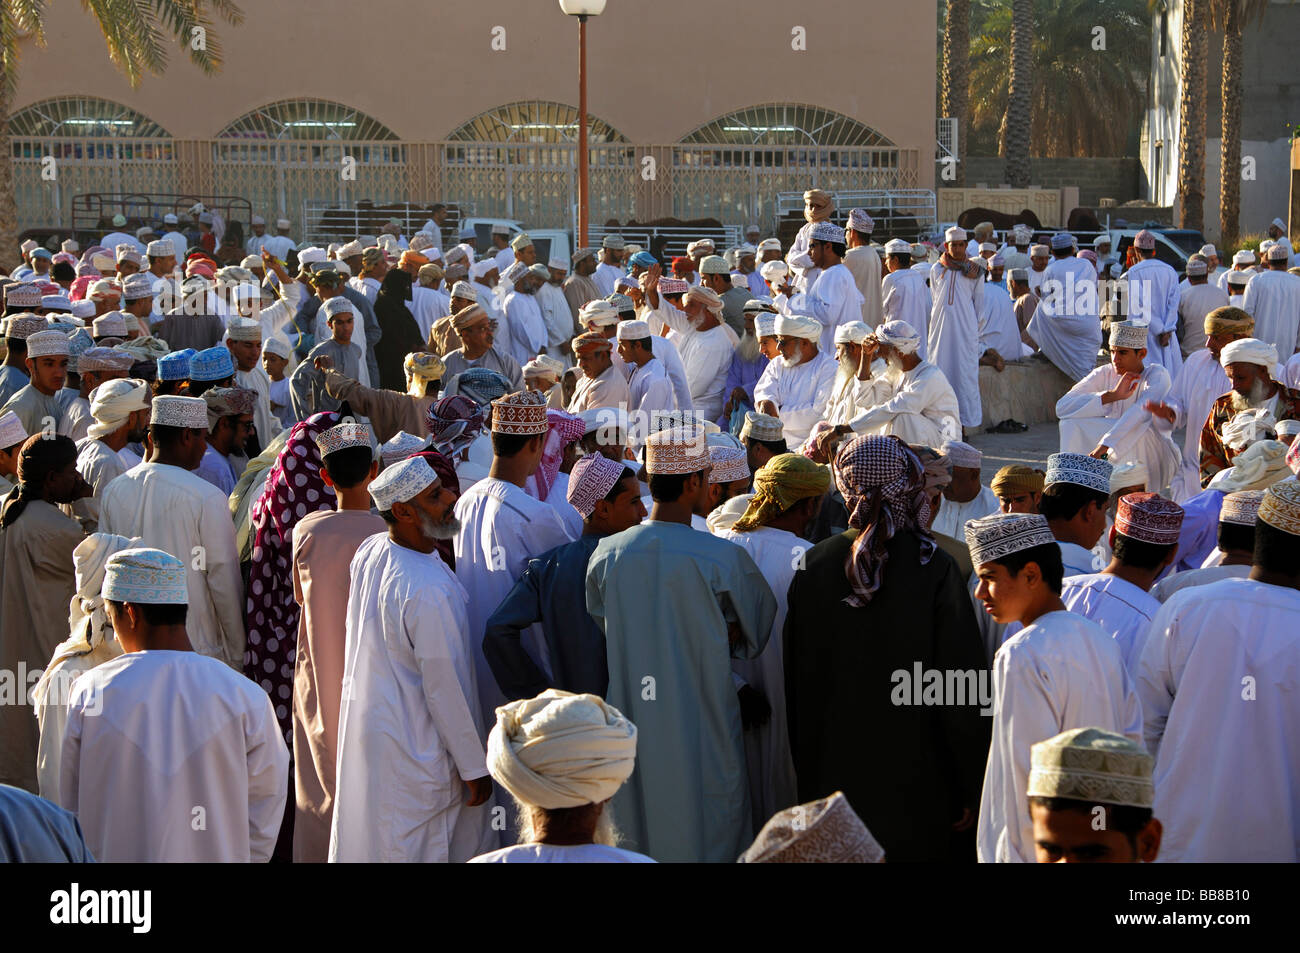 Crowd scene on a cattle market, Omani men wearing a national costume Dishdasha and a Kummah cape or a Mussar turban on the head Stock Photo